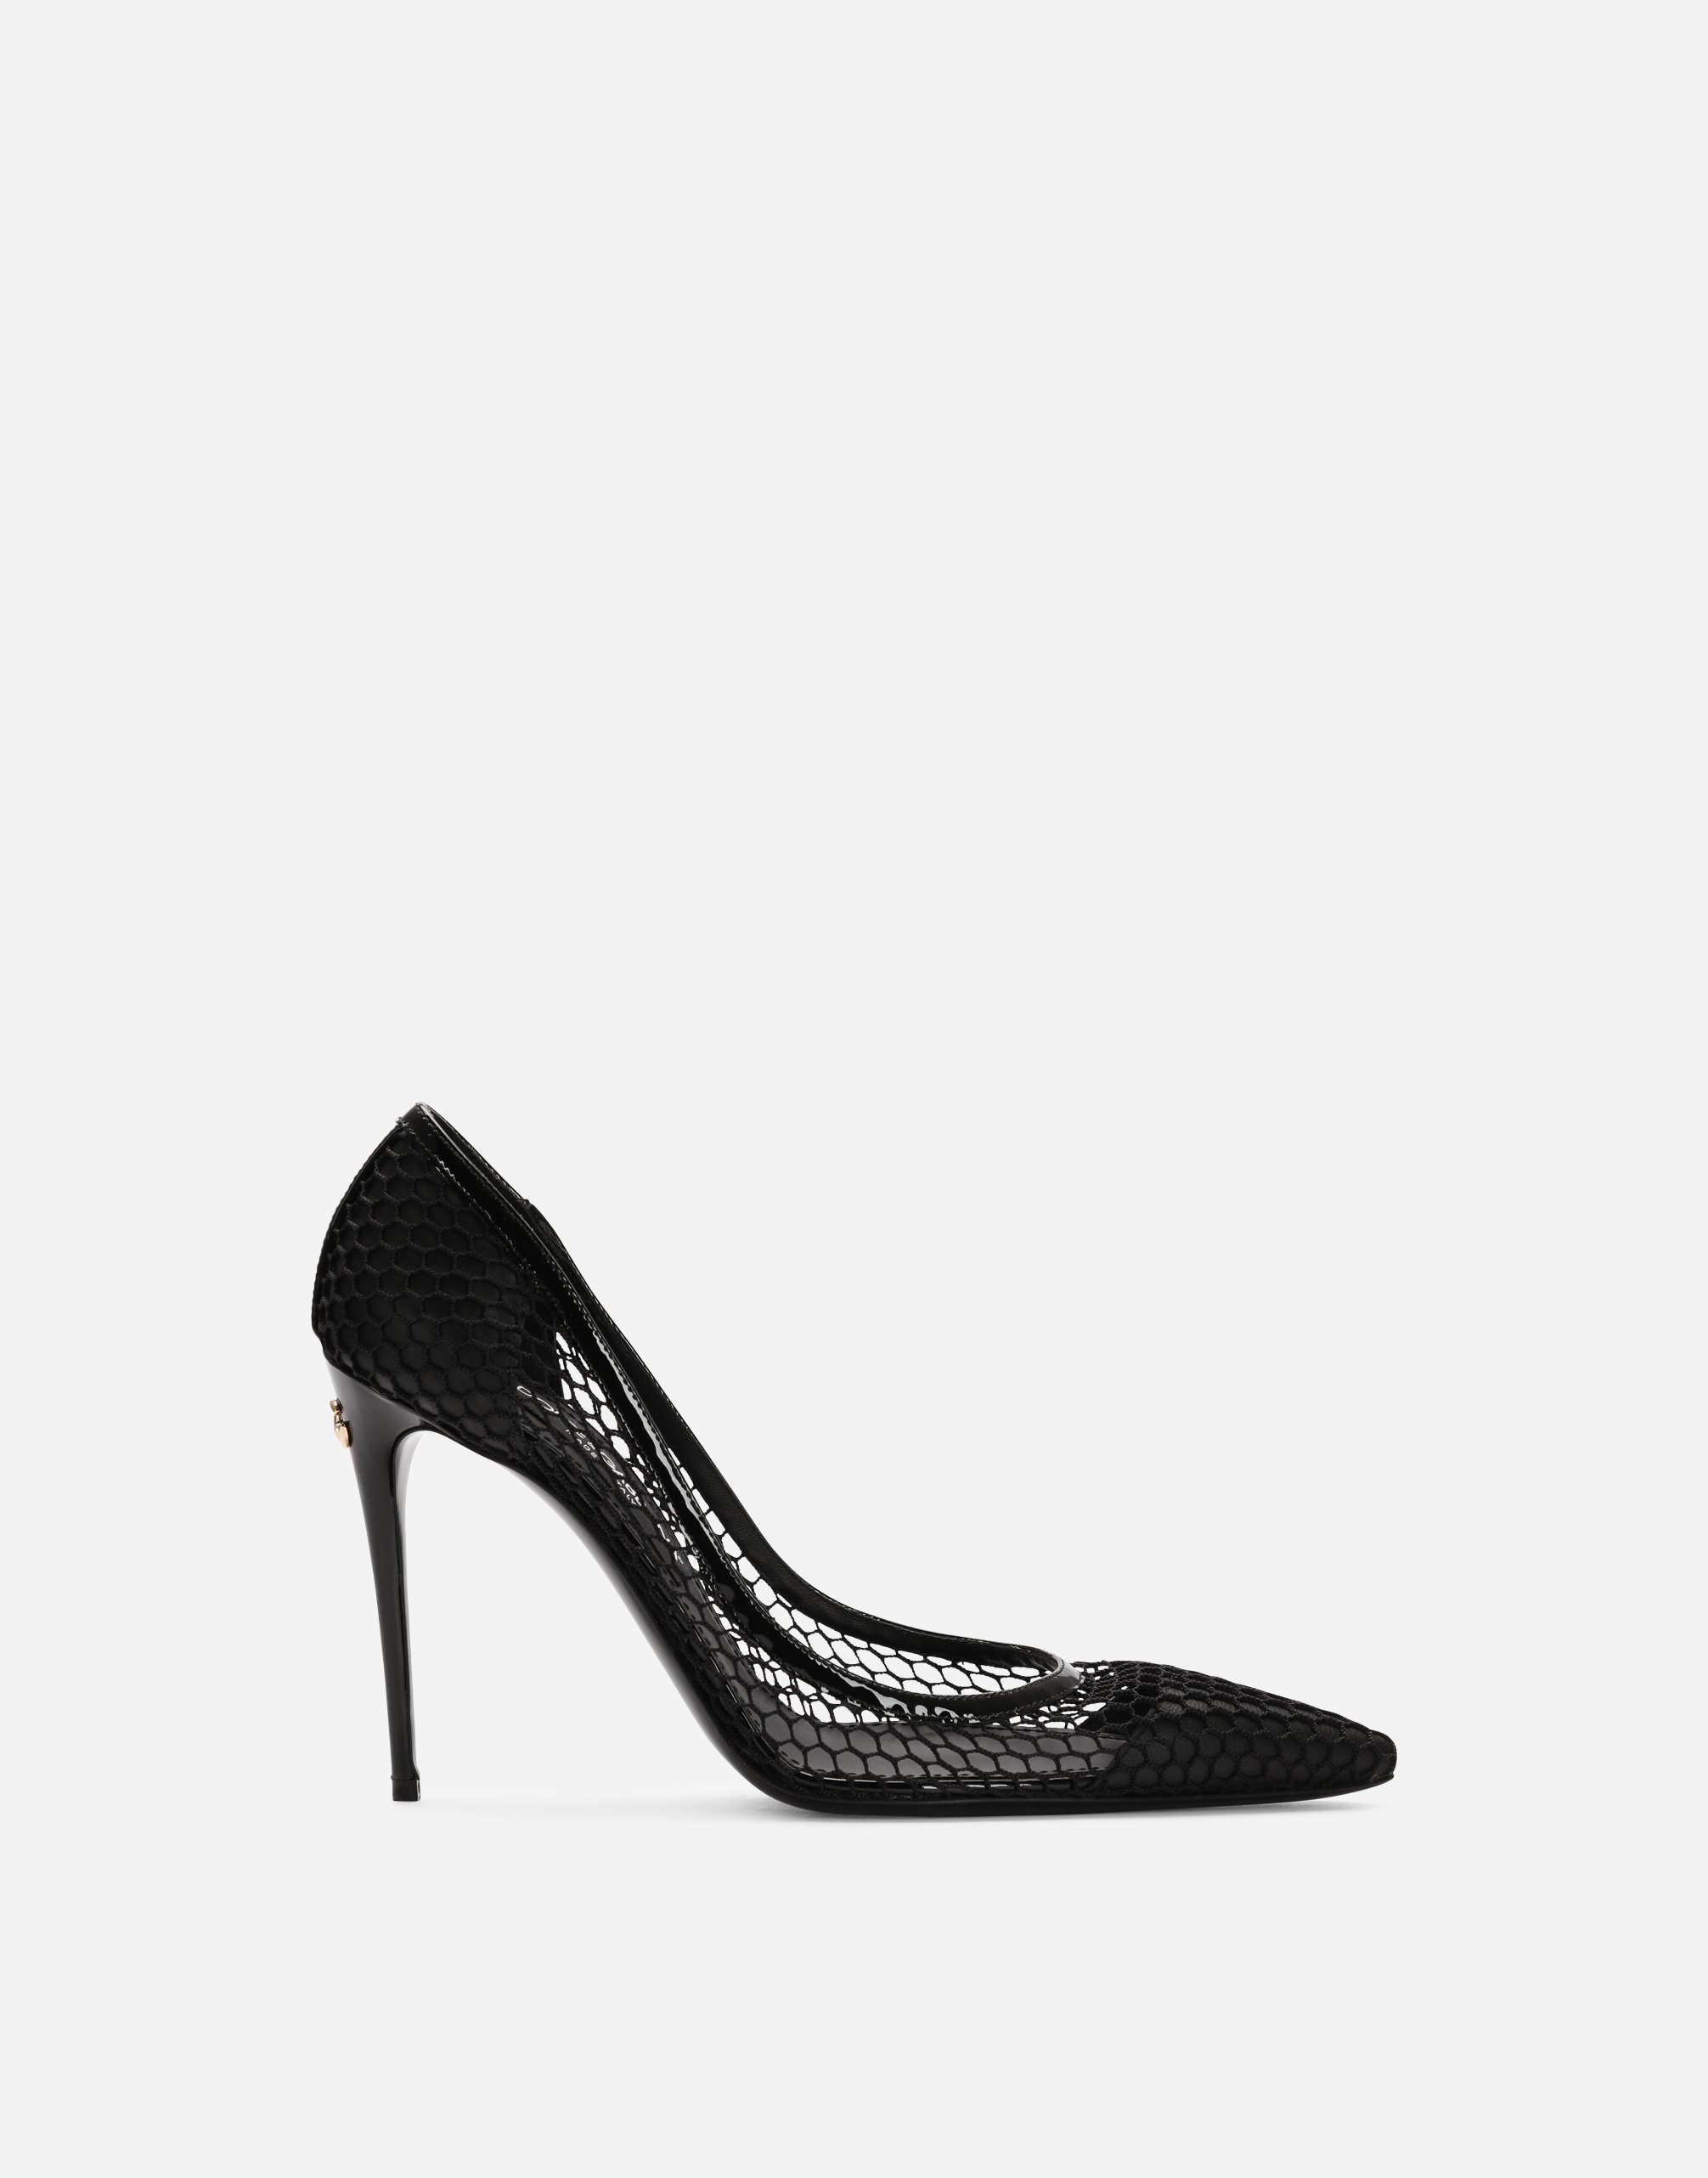 Dolce & Gabbana Mesh And Patent Leather Pumps In Black